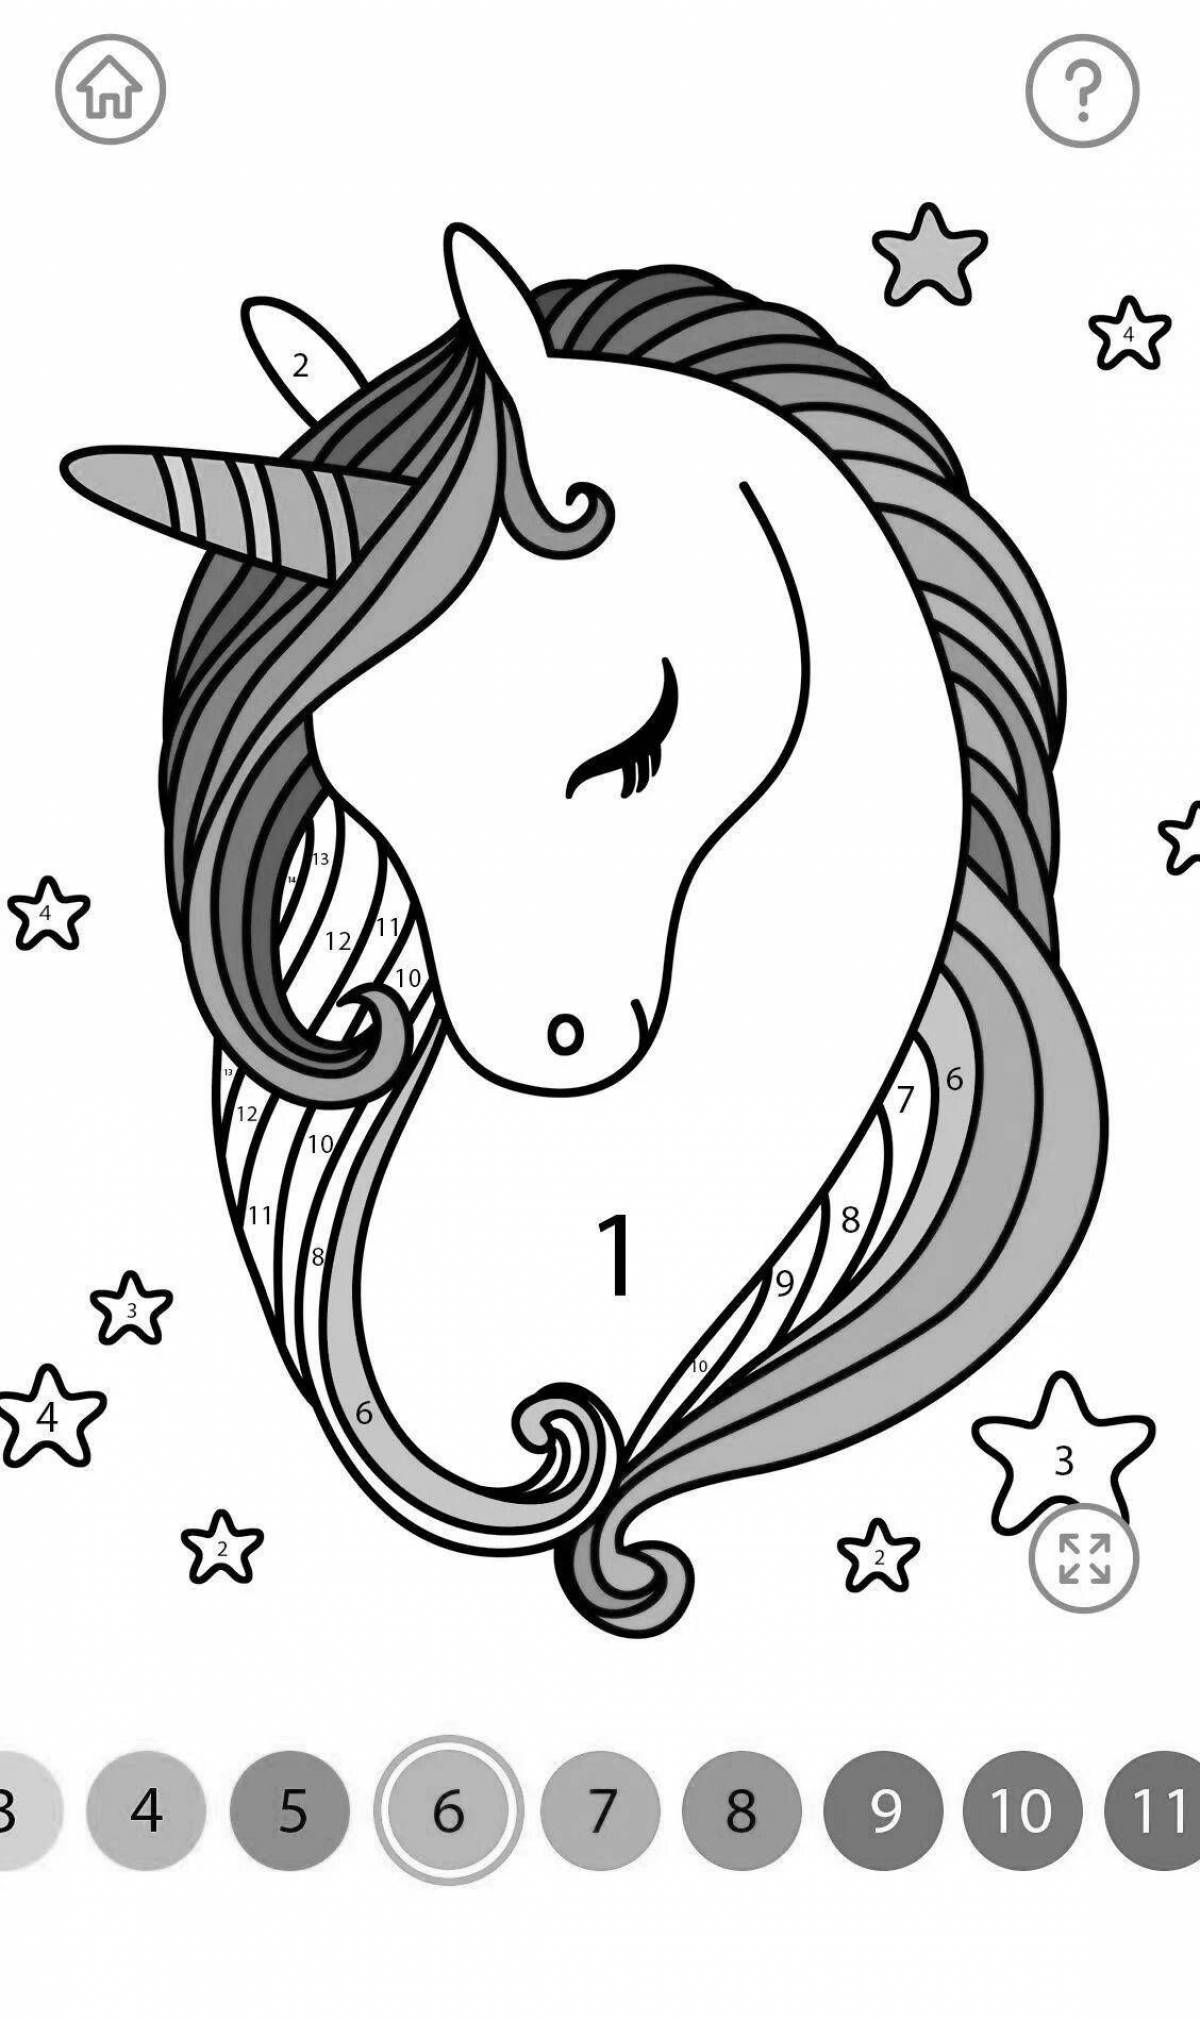 Unicorn by numbers #5